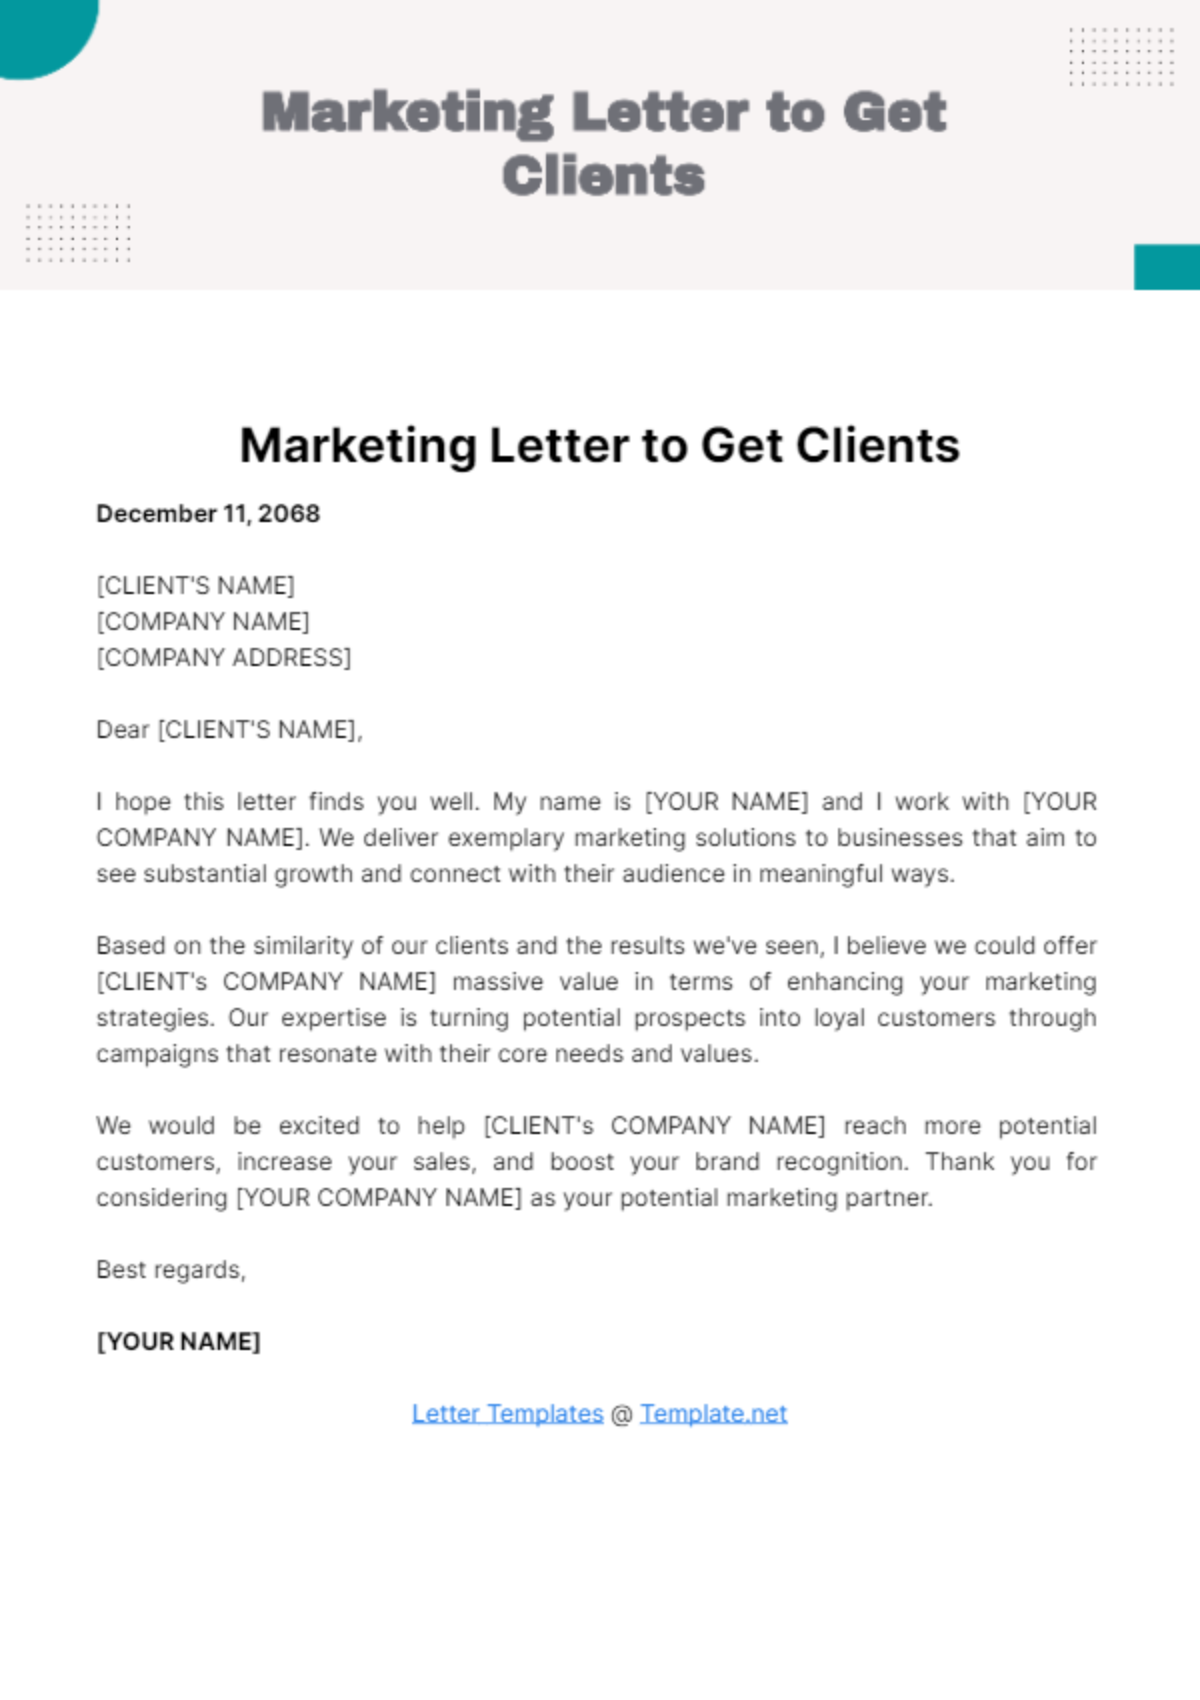 Marketing Letter to Get Clients Template